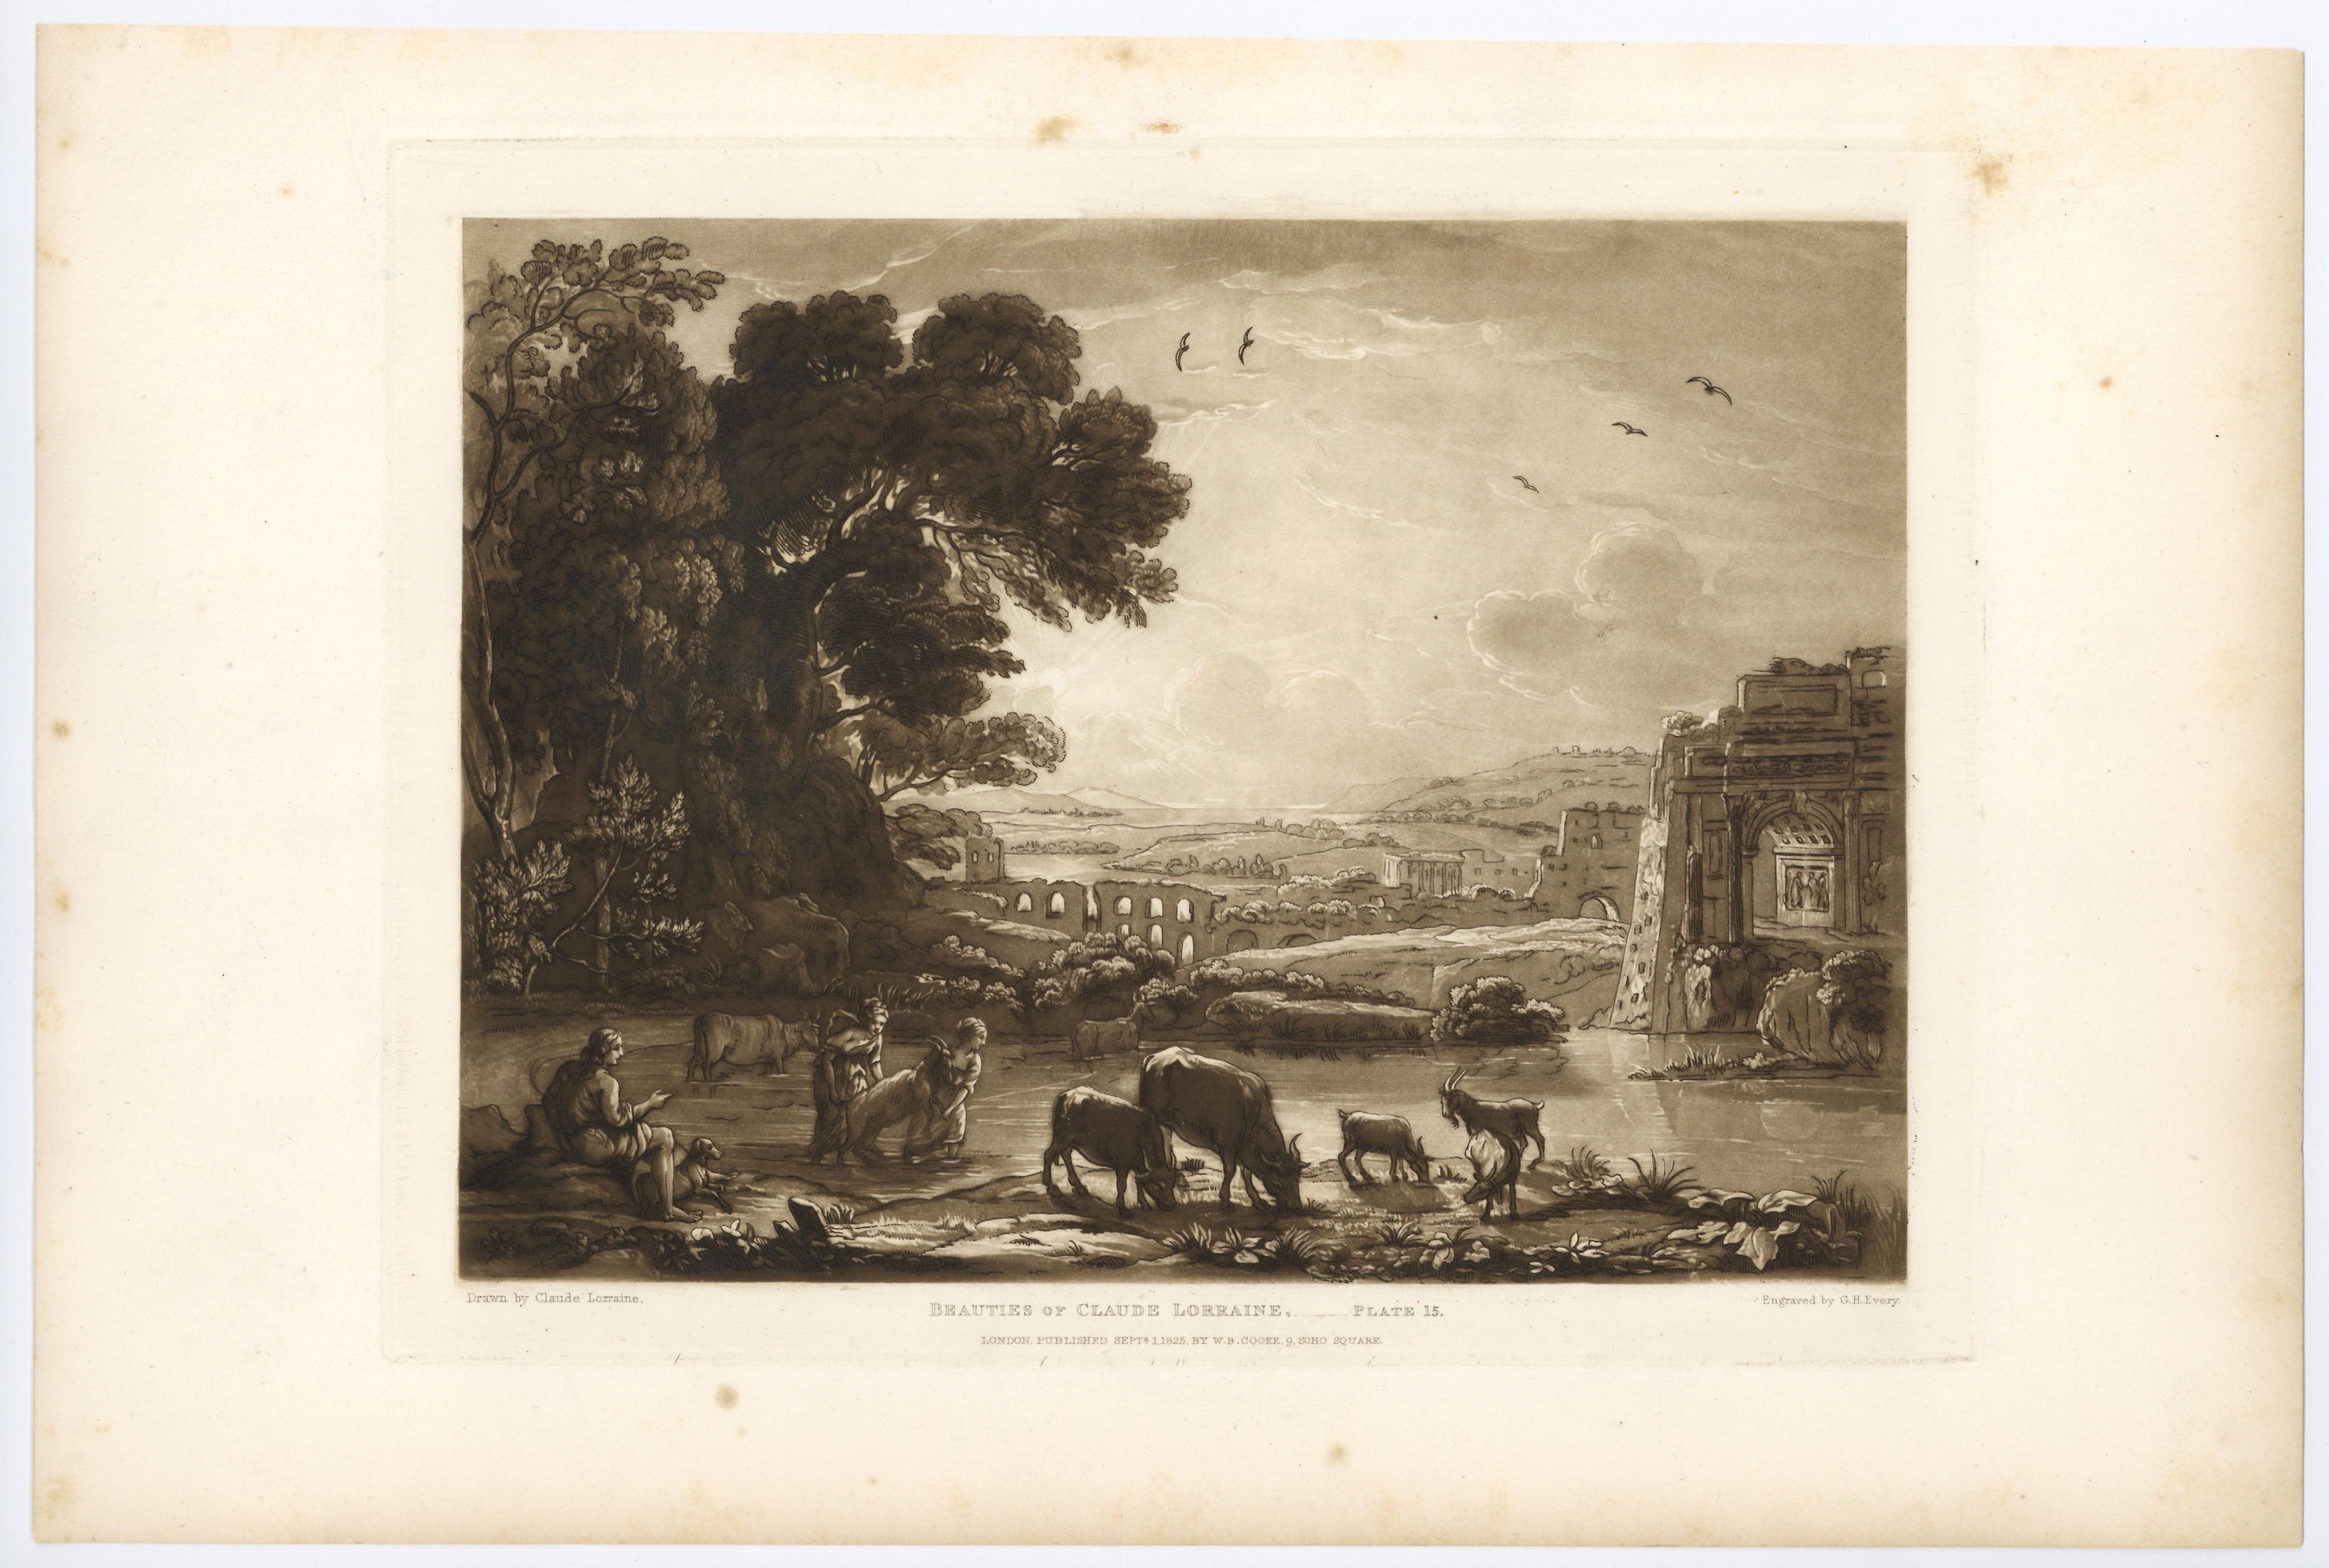 Medium: etching, engraving and mezzotint (after Claude Lorrain). This lovely impression on wove paper was engraved by G.H. Every for the 